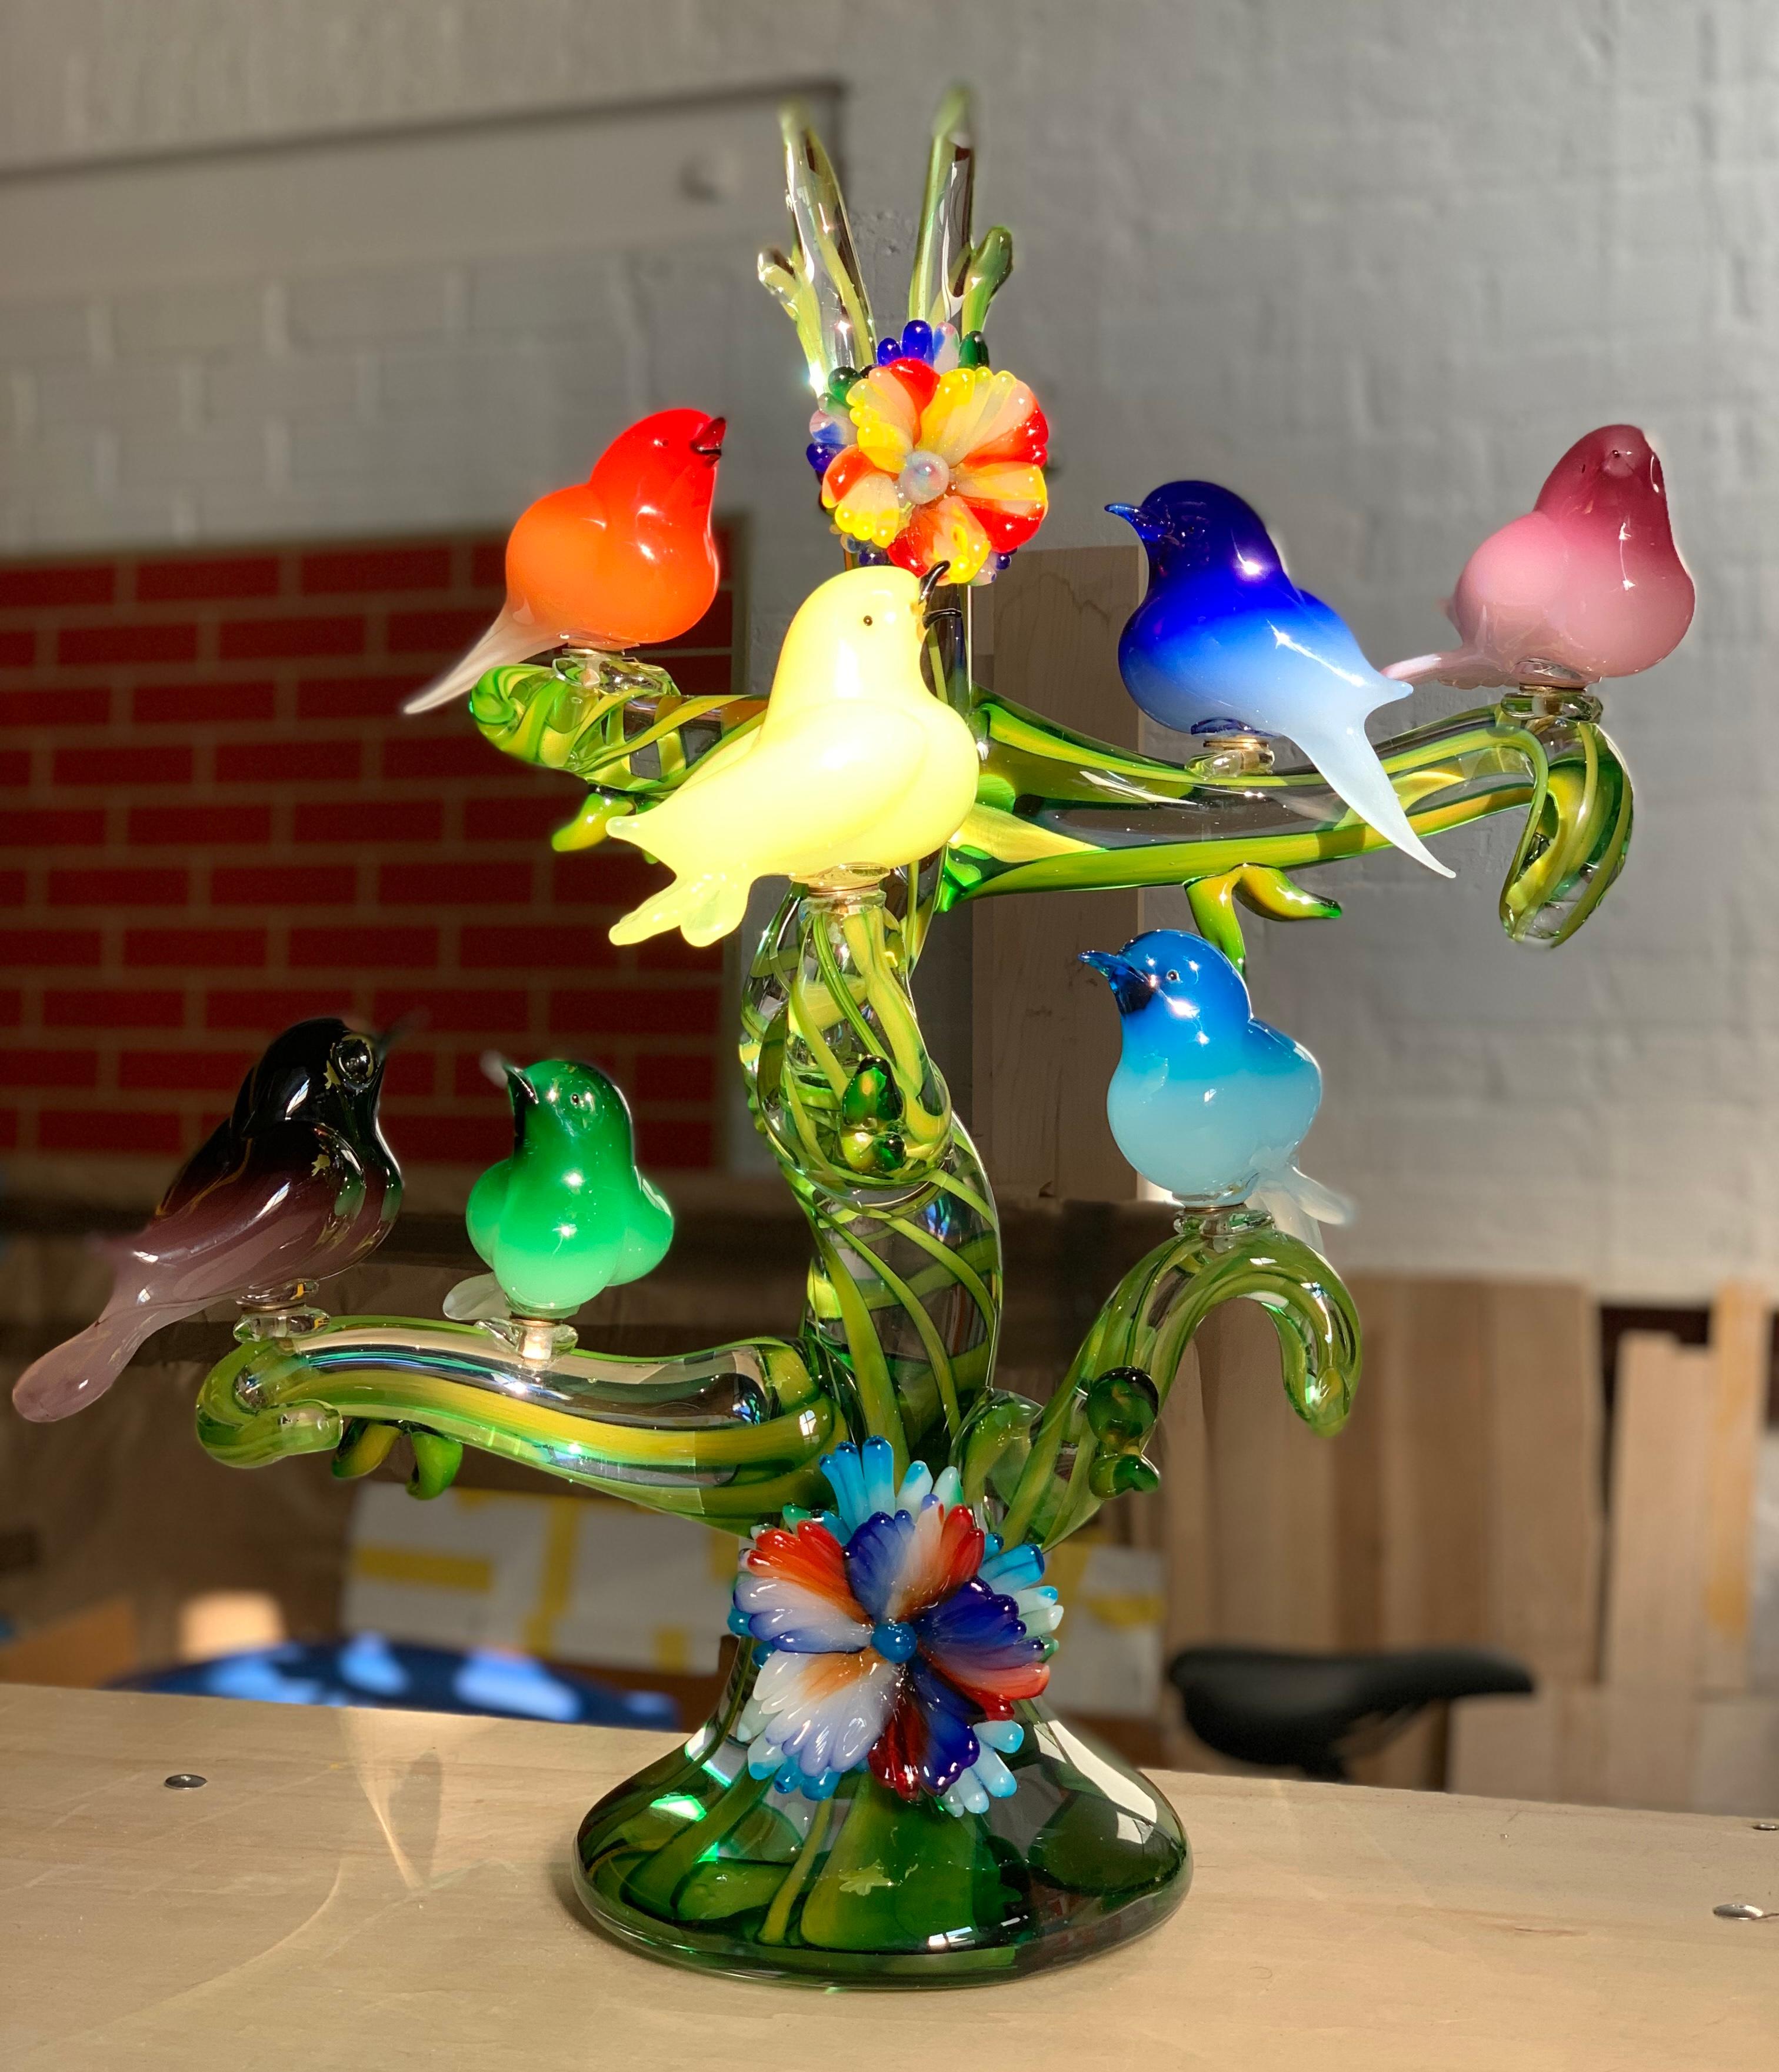 Colorful murano glass birds in a tree sculpture, Enrico Cammozzo, Italy, 1970s. Gorgeous monumental piece. Murano Italian art glass bird sculpture. Enrico Cammozzo (Italian, born 1965). Seven birds perched on a tree bearing two large glass flowers.